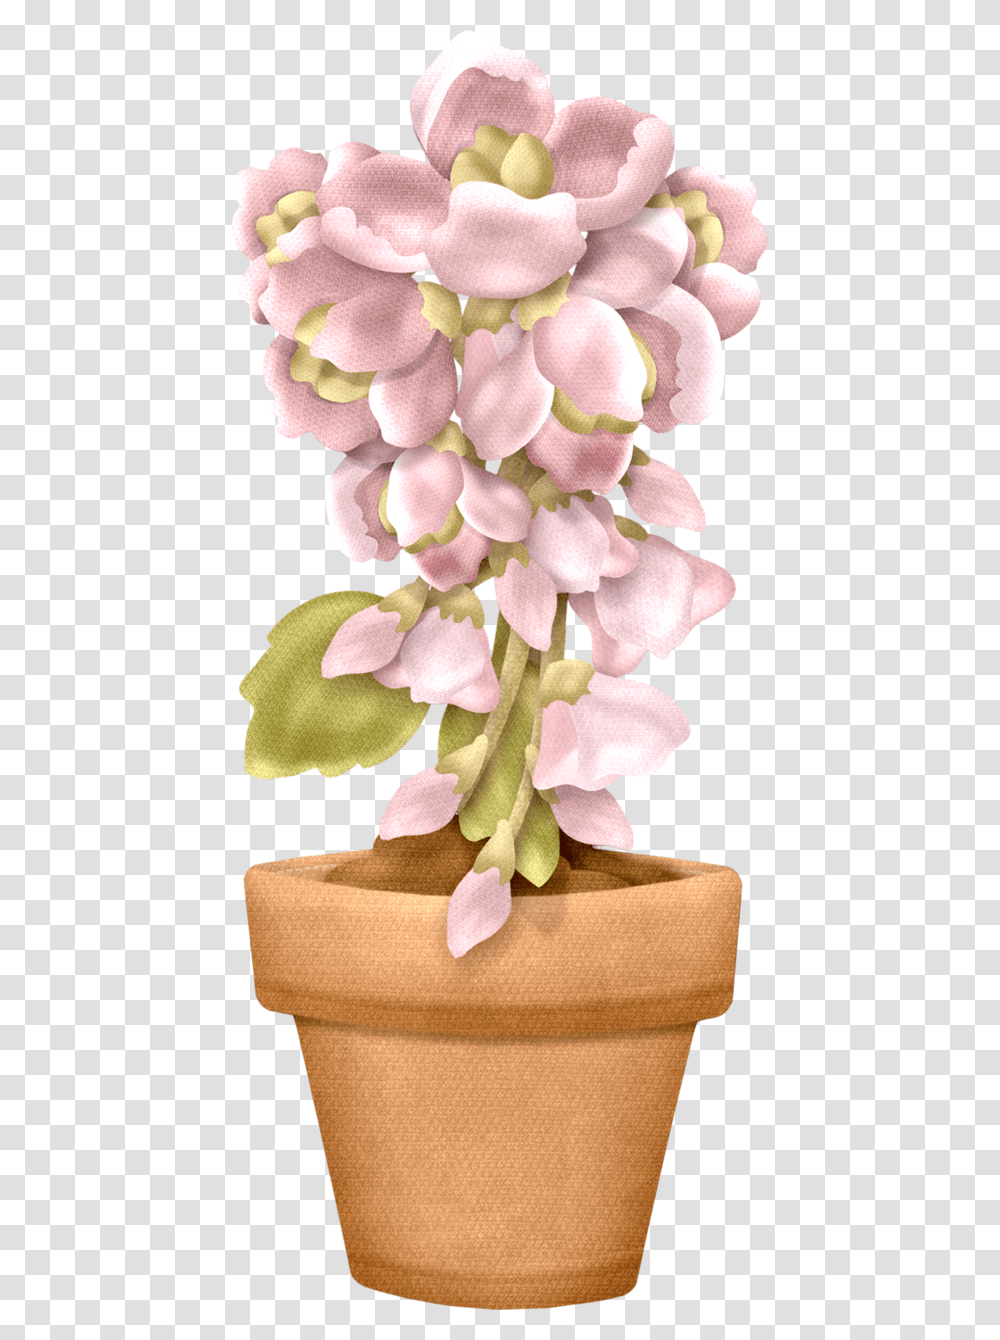 Potted Flowers Lily Of The Valley, Plant, Blossom, Orchid, Wedding Cake Transparent Png